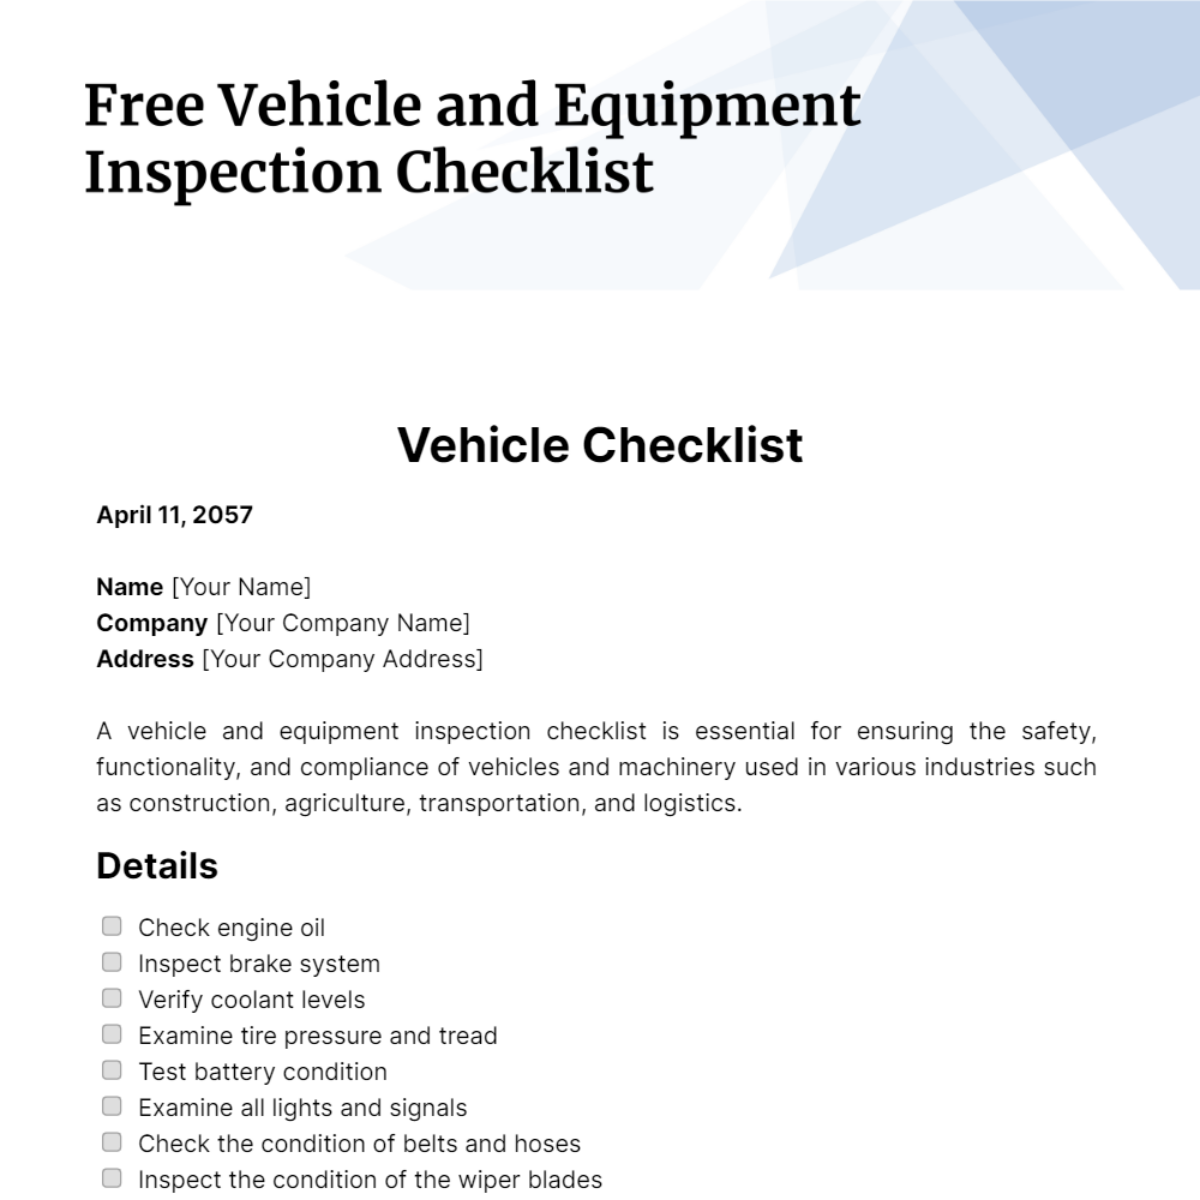 Free Vehicle and Equipment Inspection Checklist Template